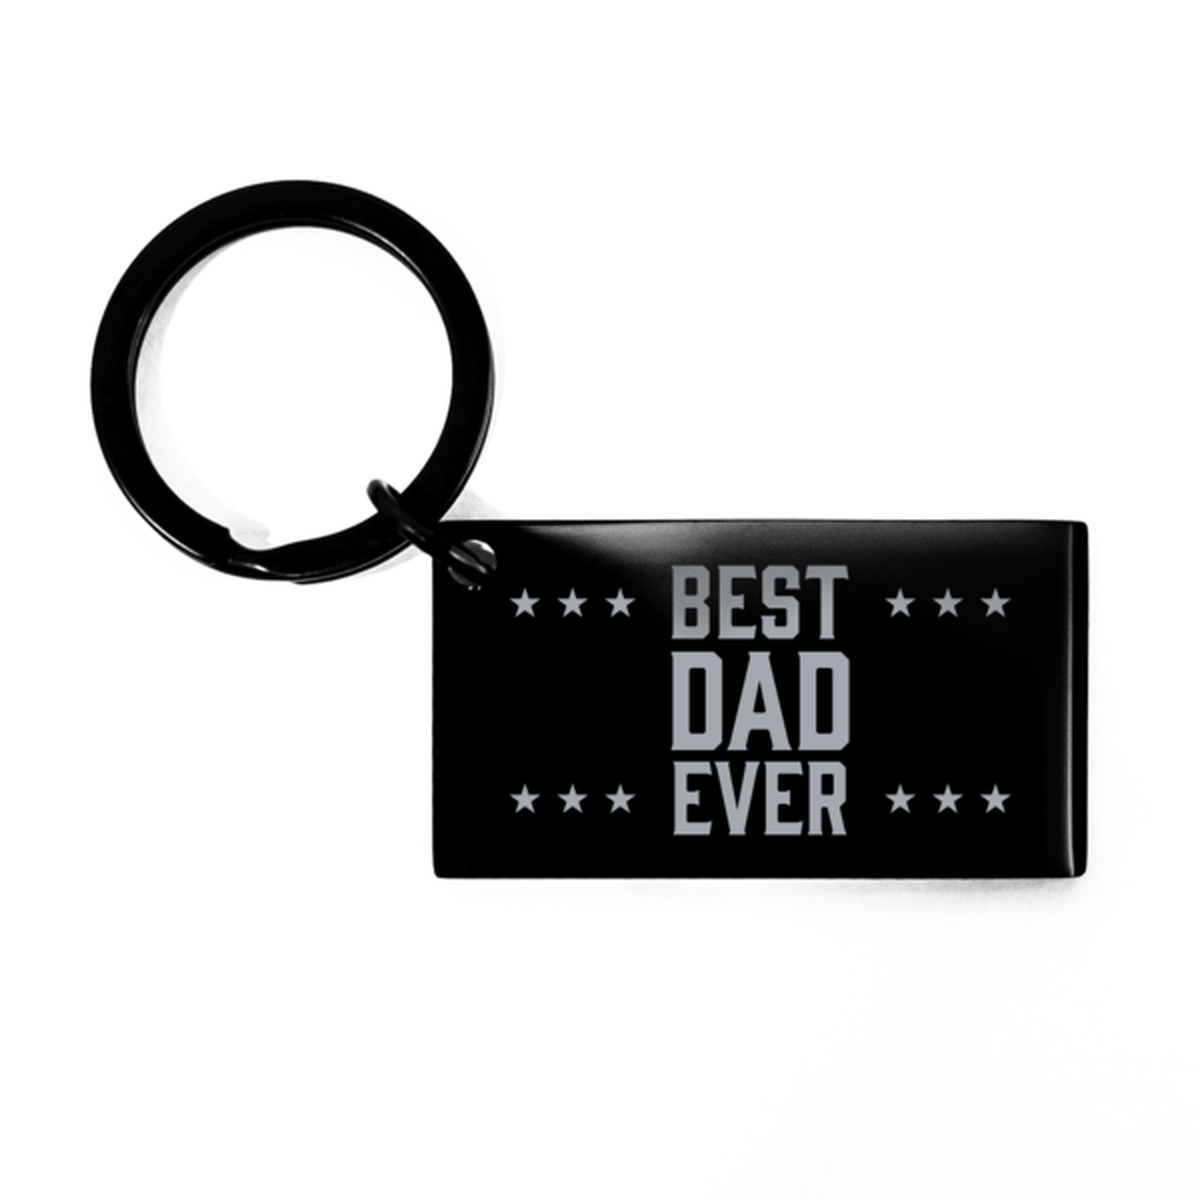 Best Dad Ever Dad Gifts, Funny Black Keychain For Dad, Birthday Engraved Keyring Presents For Women